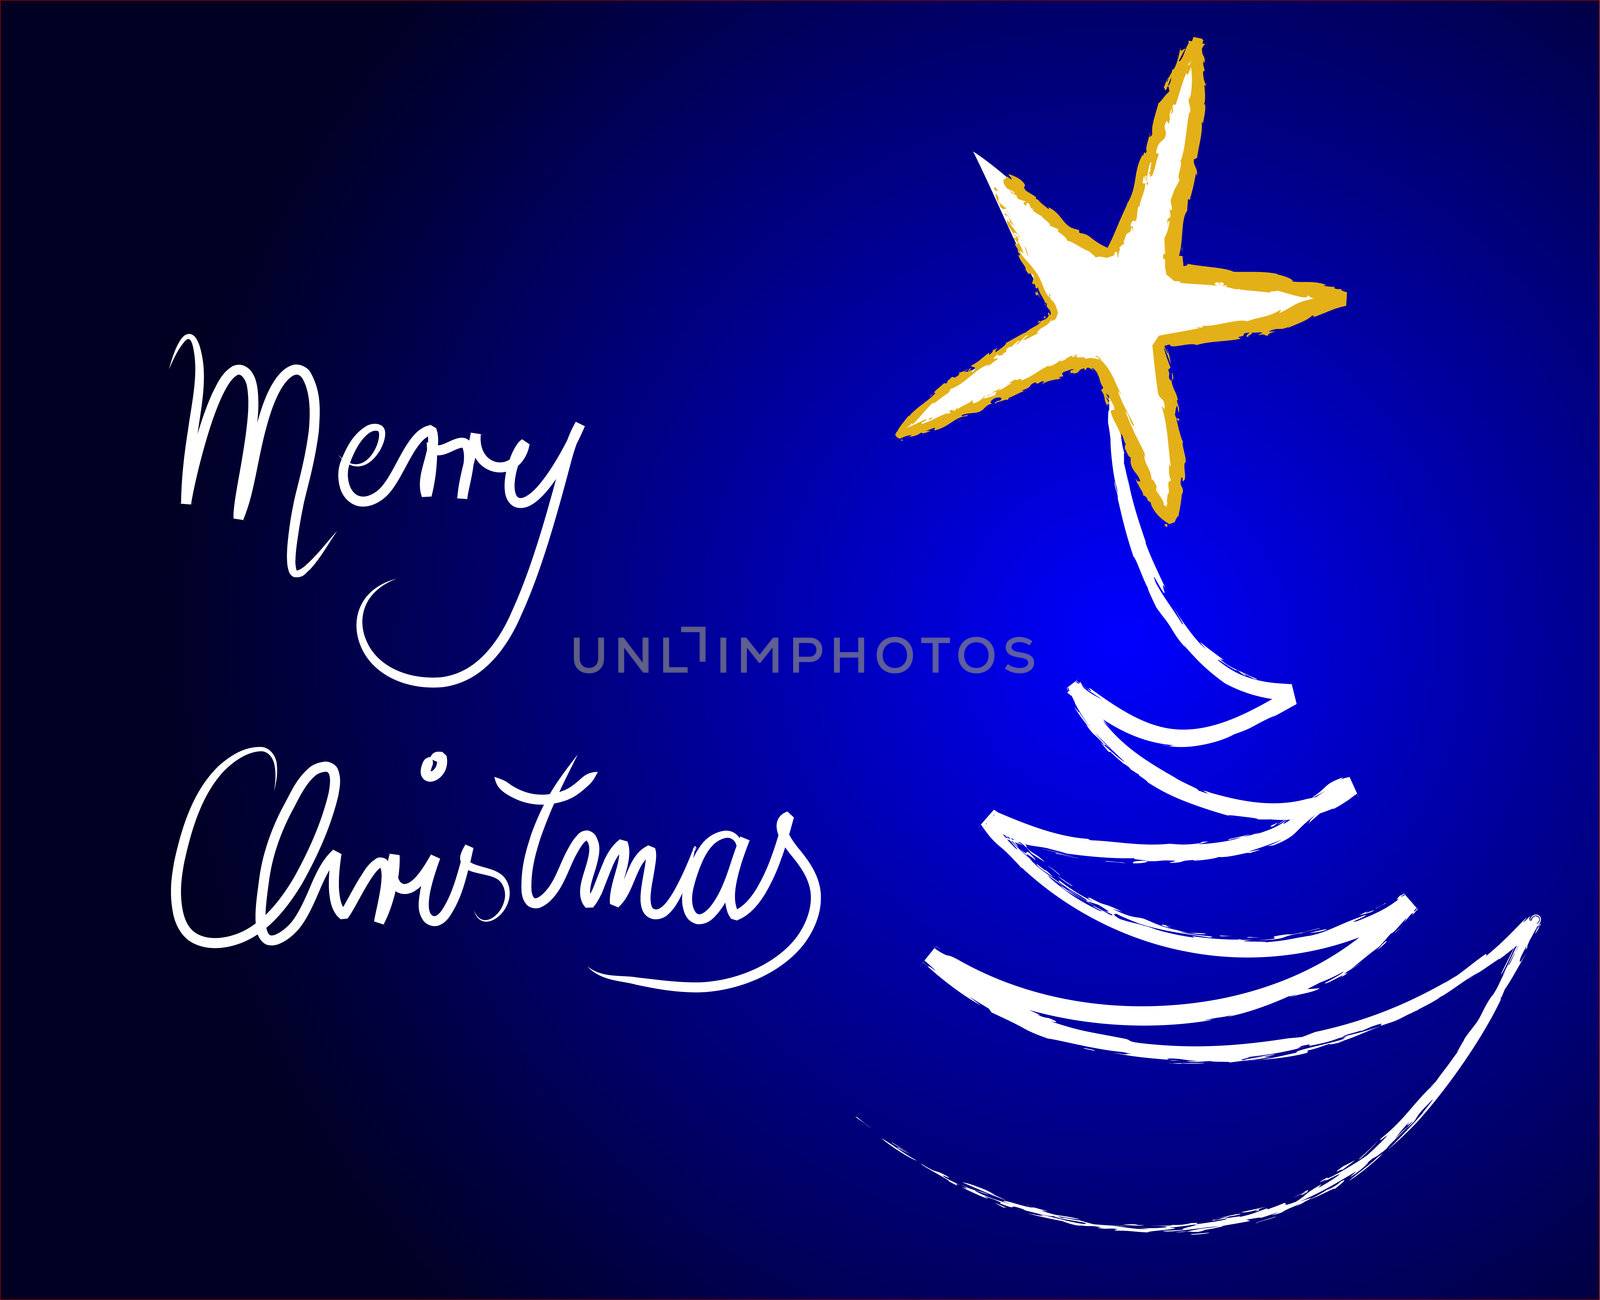 Abstract Merry Christmas Card